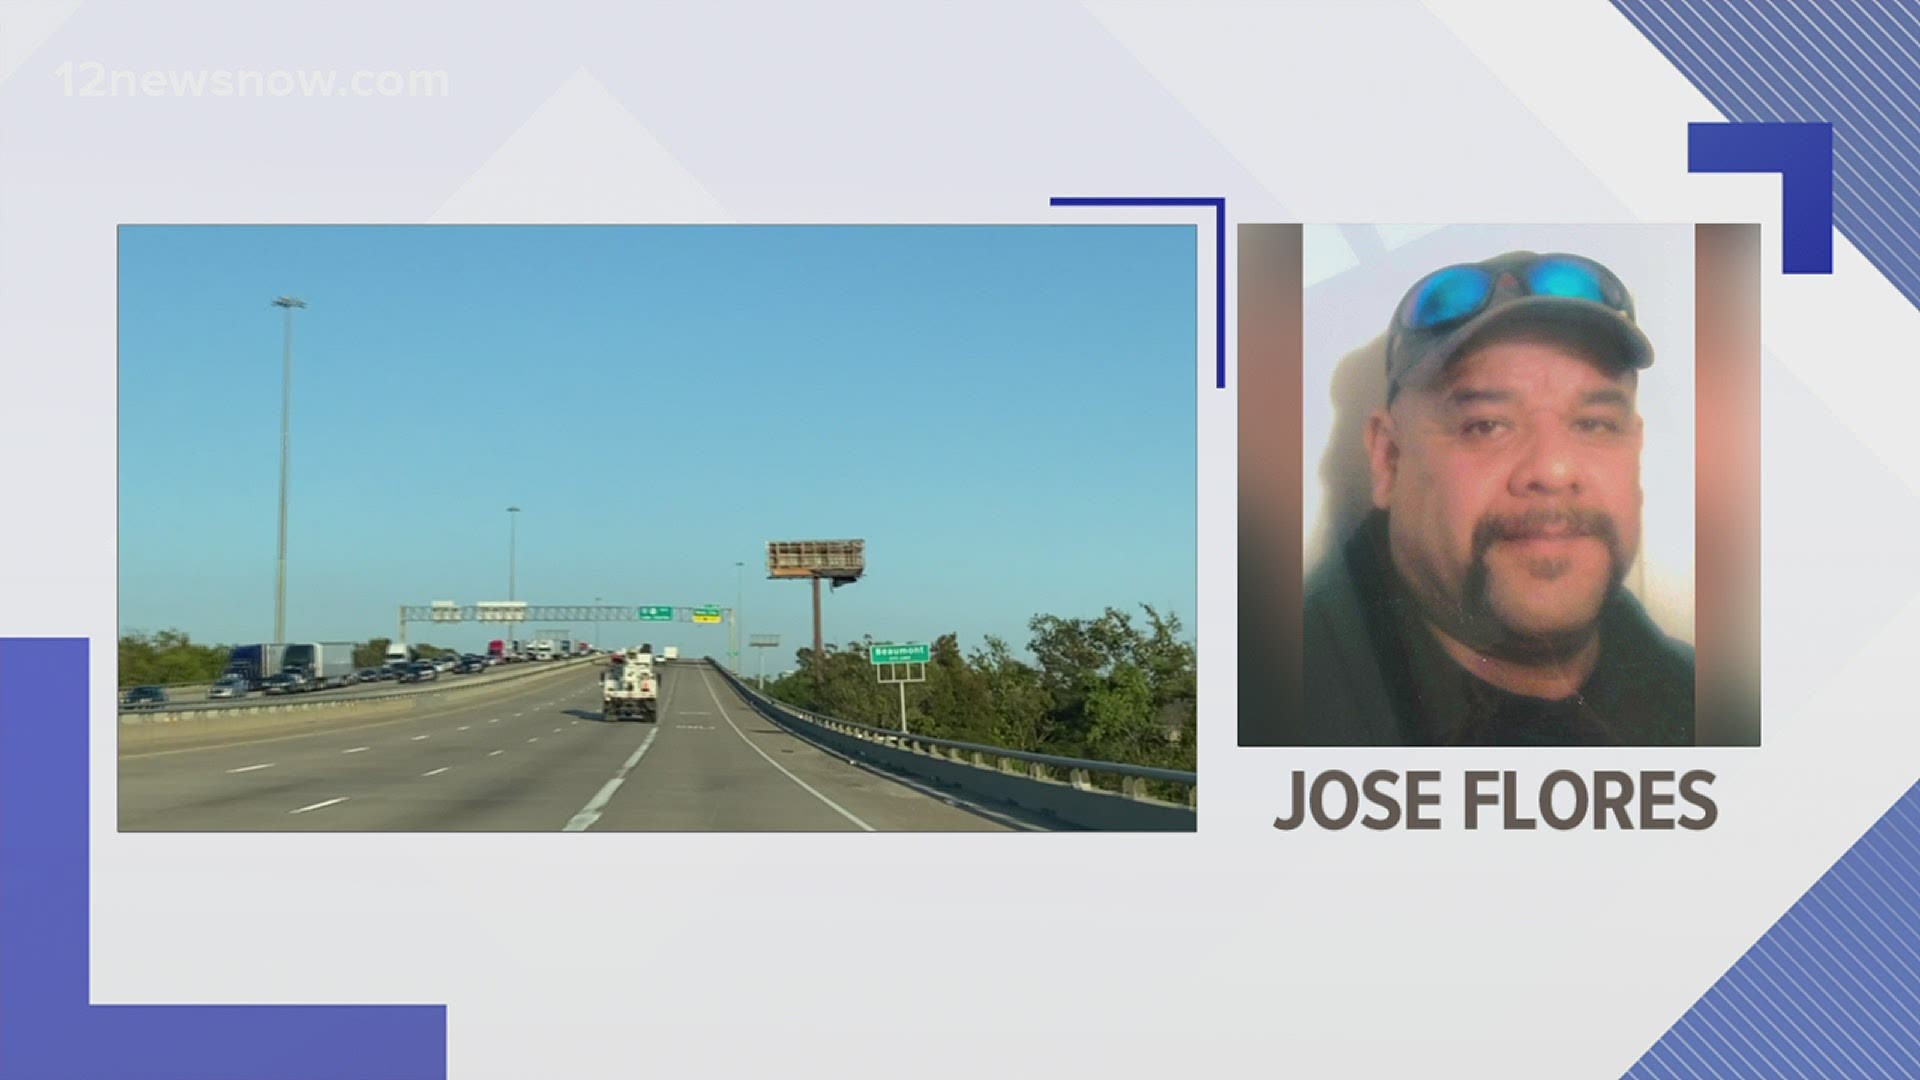 Jose Flores' family is suing the company that owned the truck he was driving, claiming it failed to maintain the truck